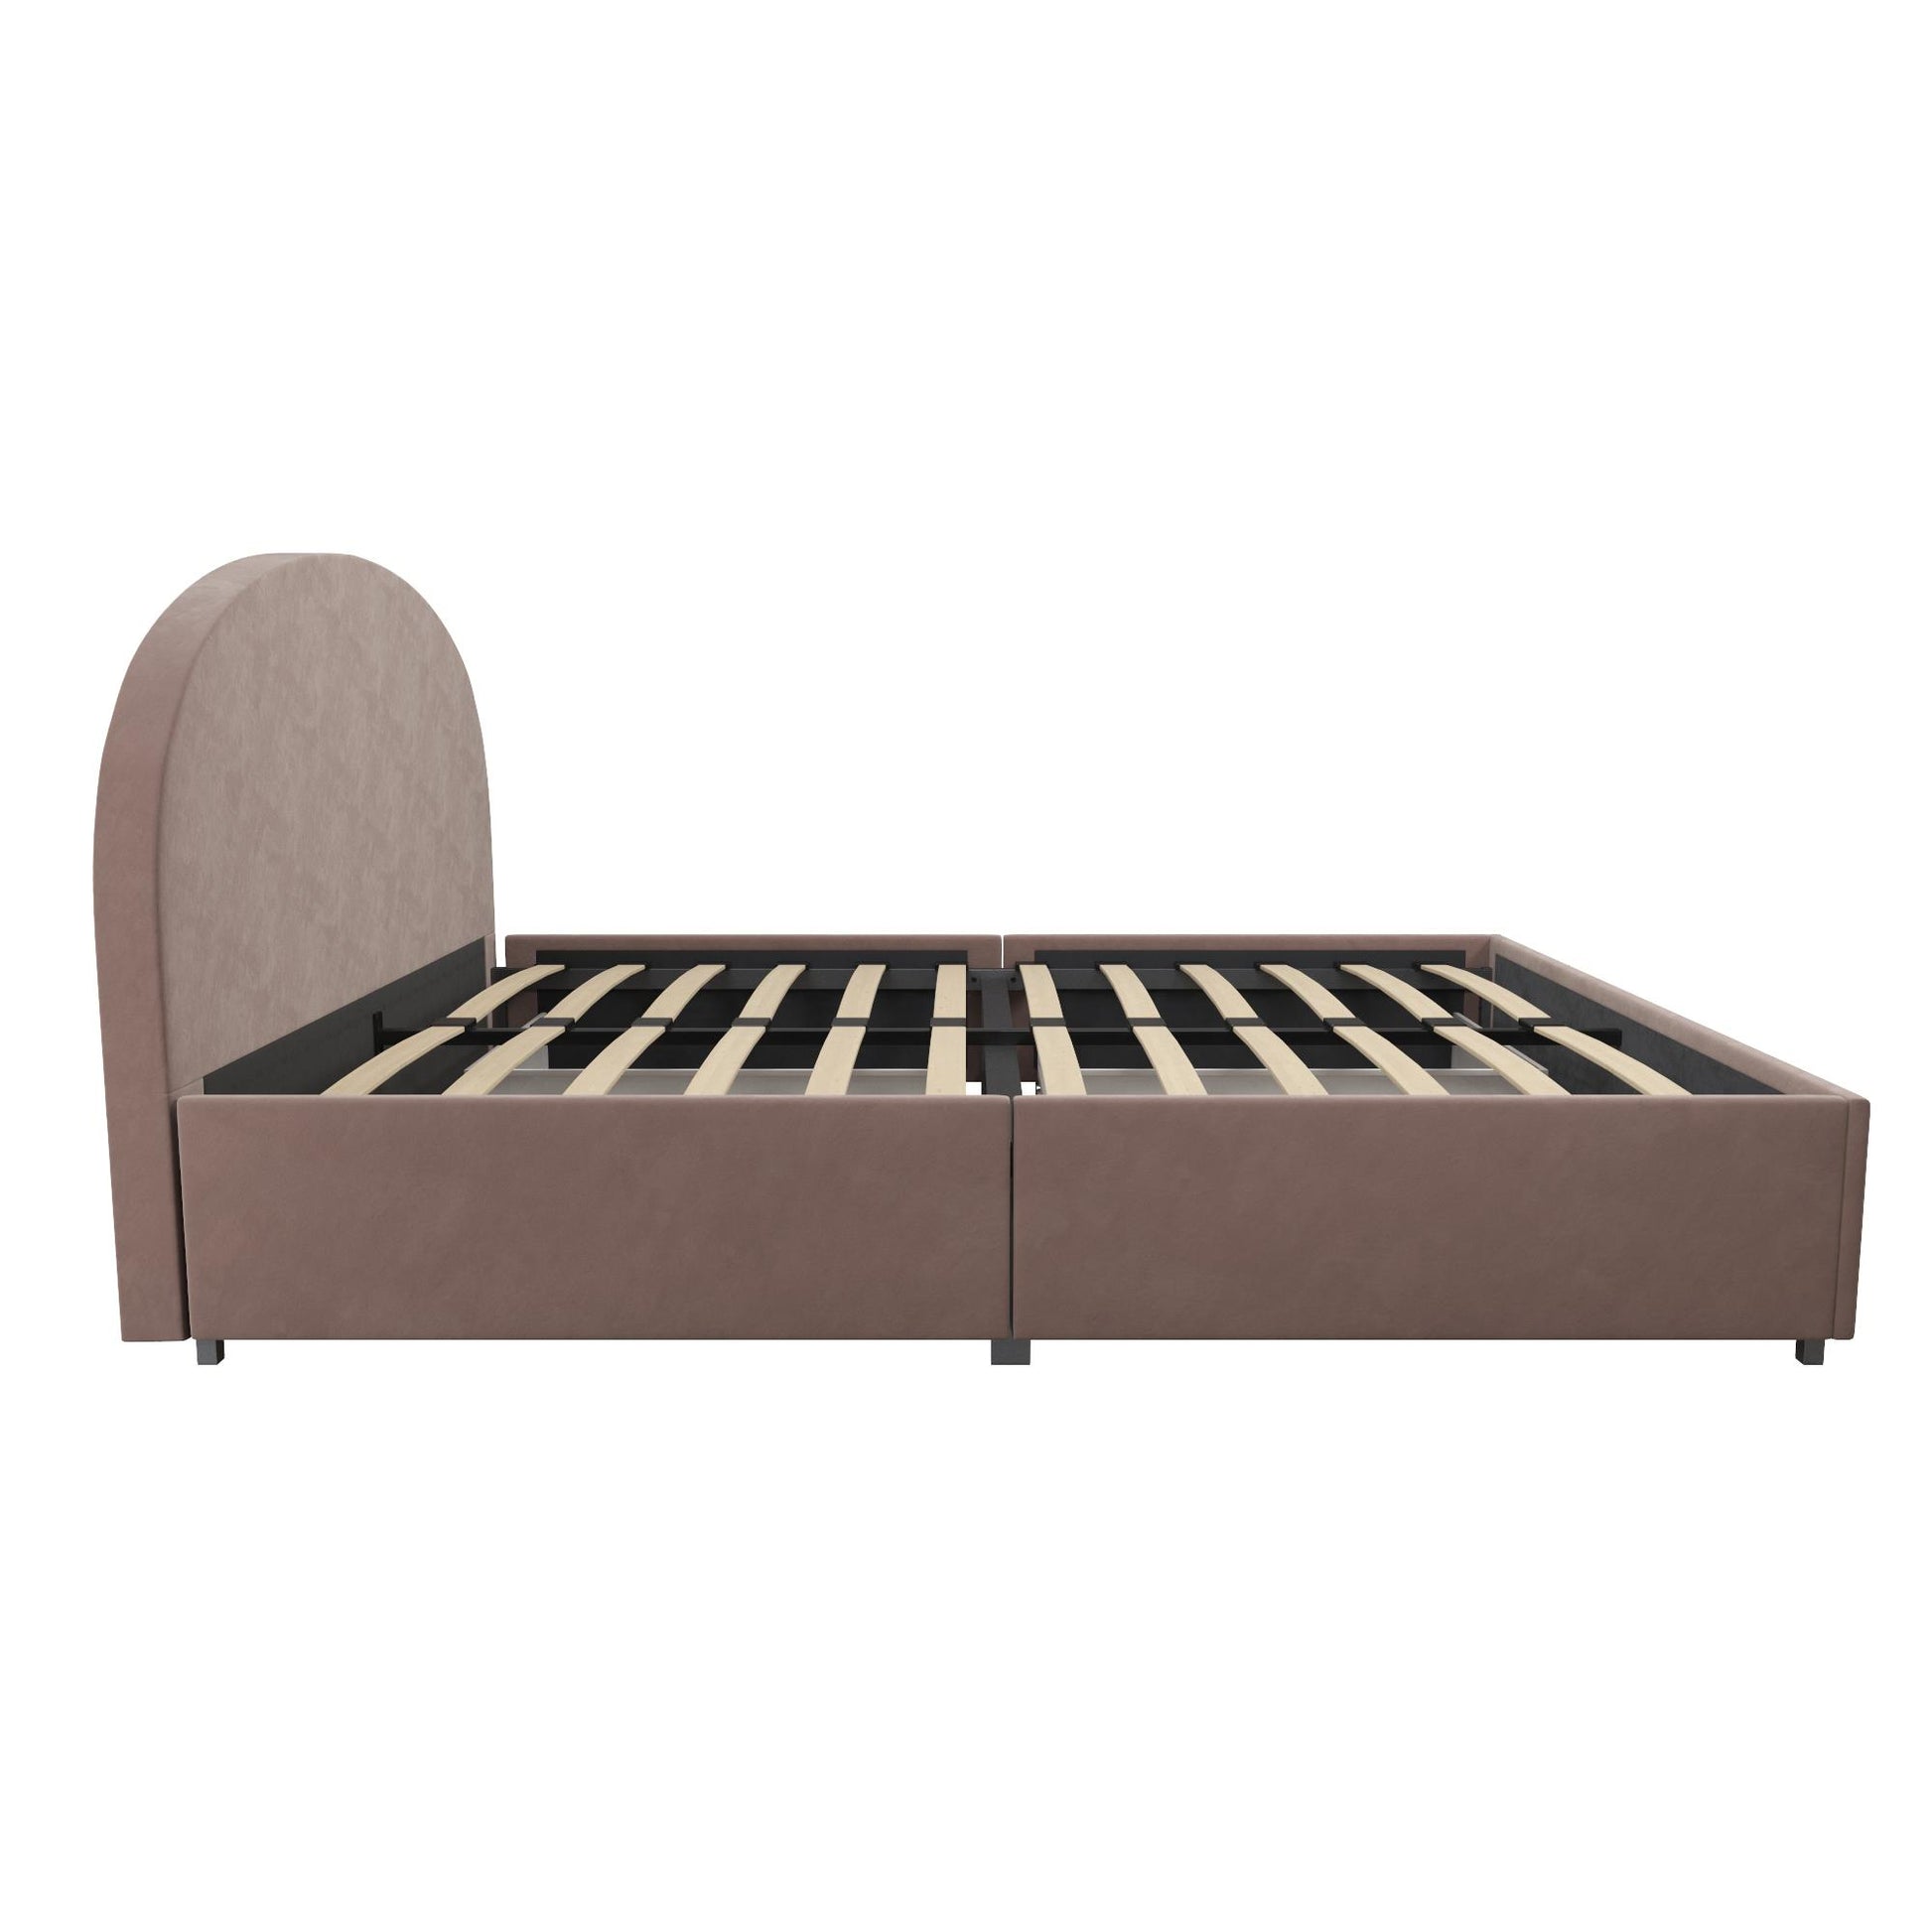 Moon Upholstered Bed with Storage - Blush - Full